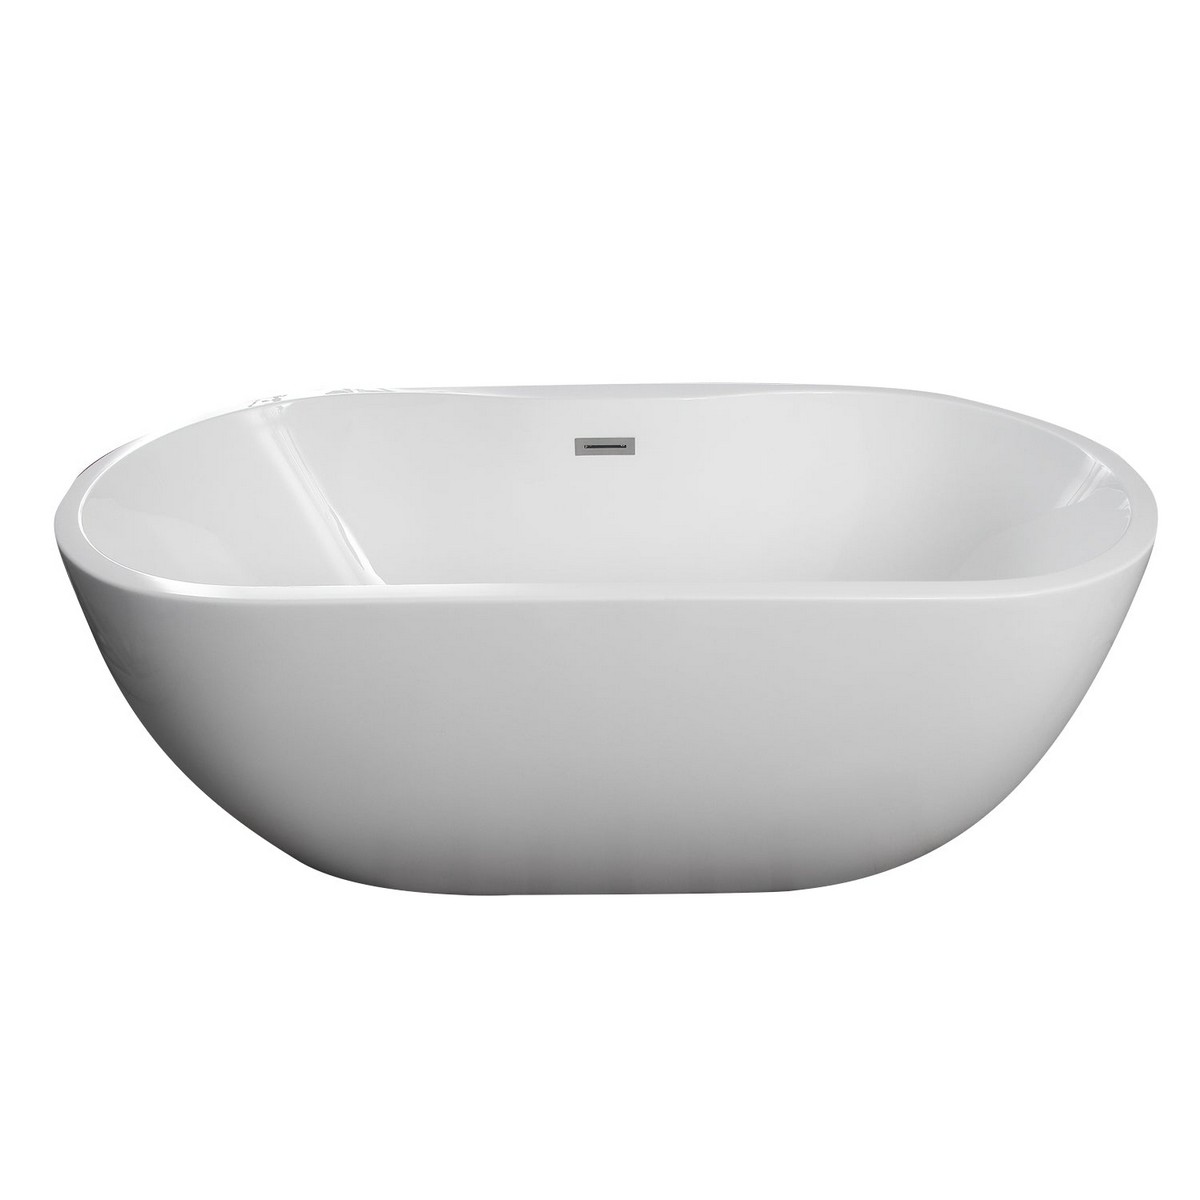 BARCLAY ATOVH61FIG PENNEY 60 3/4 INCH ACRYLIC FREESTANDING OVAL SOAKING BATHTUB IN WHITE WITH INTEGRAL DRAIN AND OVERFLOW AND TAP DECK